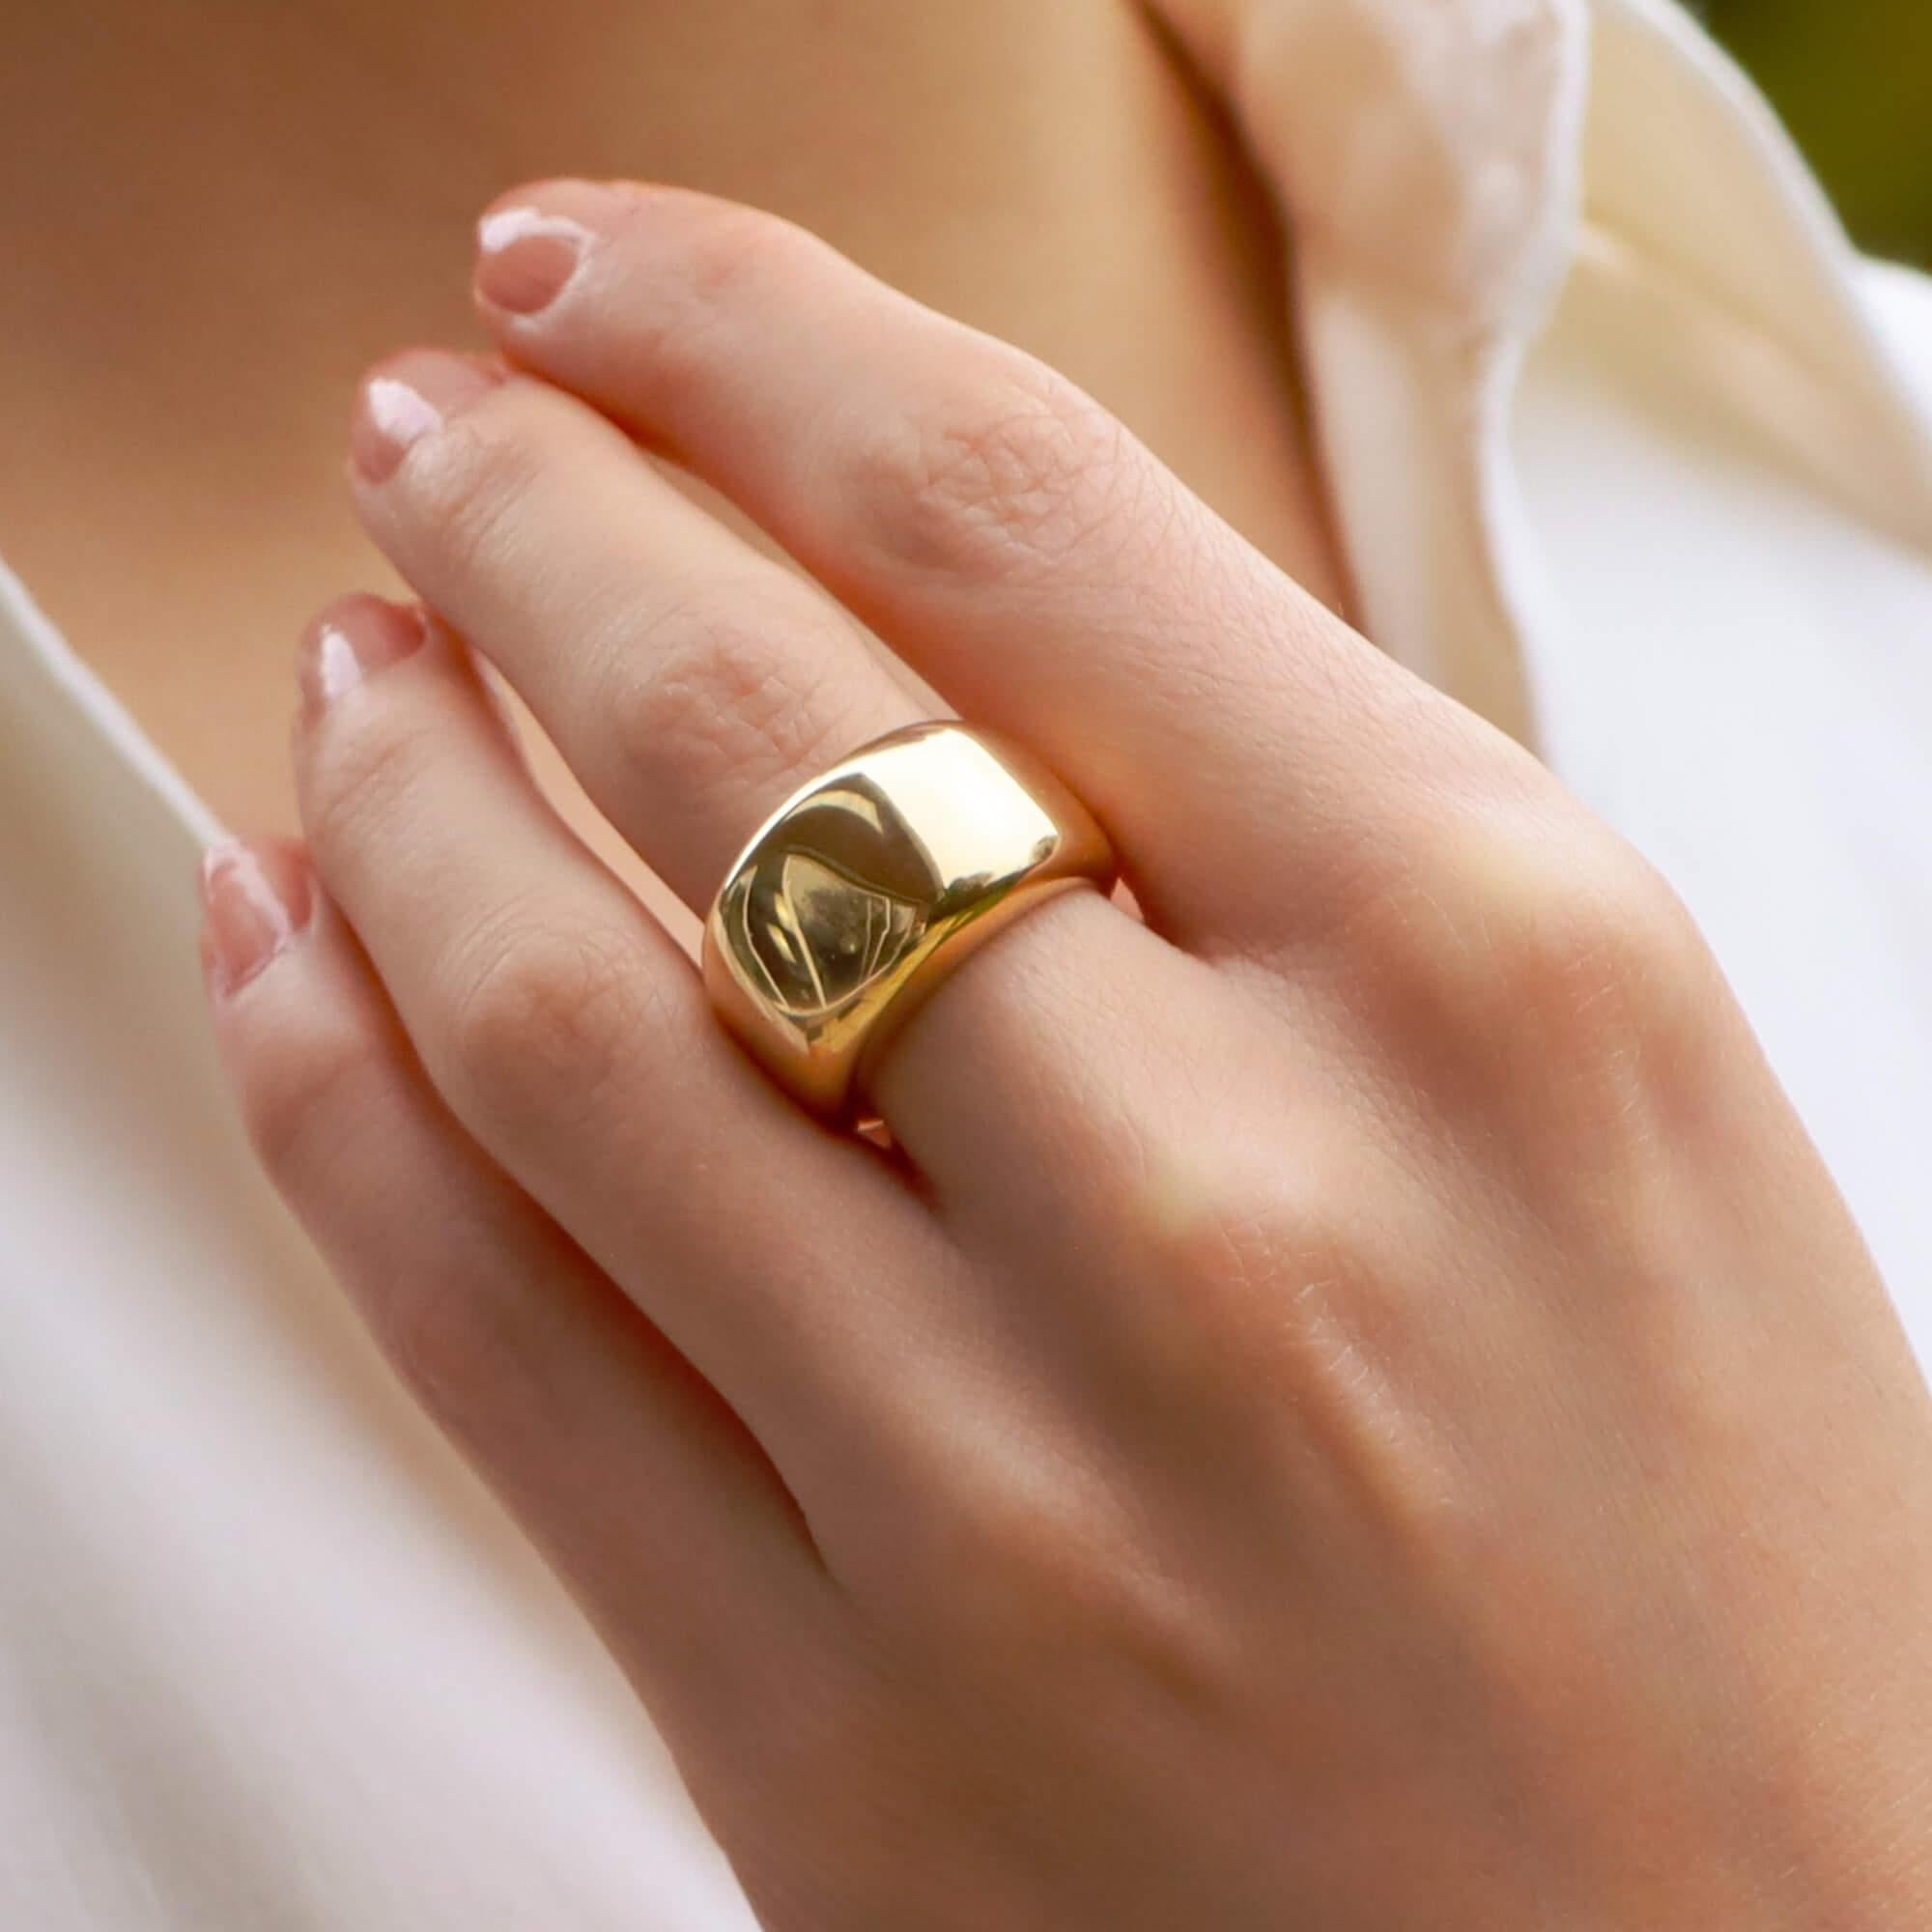 A beautiful vintage Cartier ‘New Wave’ bombe ring set in 18k yellow gold.

From the now discontinued New Wave collection, the ring is composed of a bombe design.

Due to the design and size this ring could be worn for a variety of occasions. The